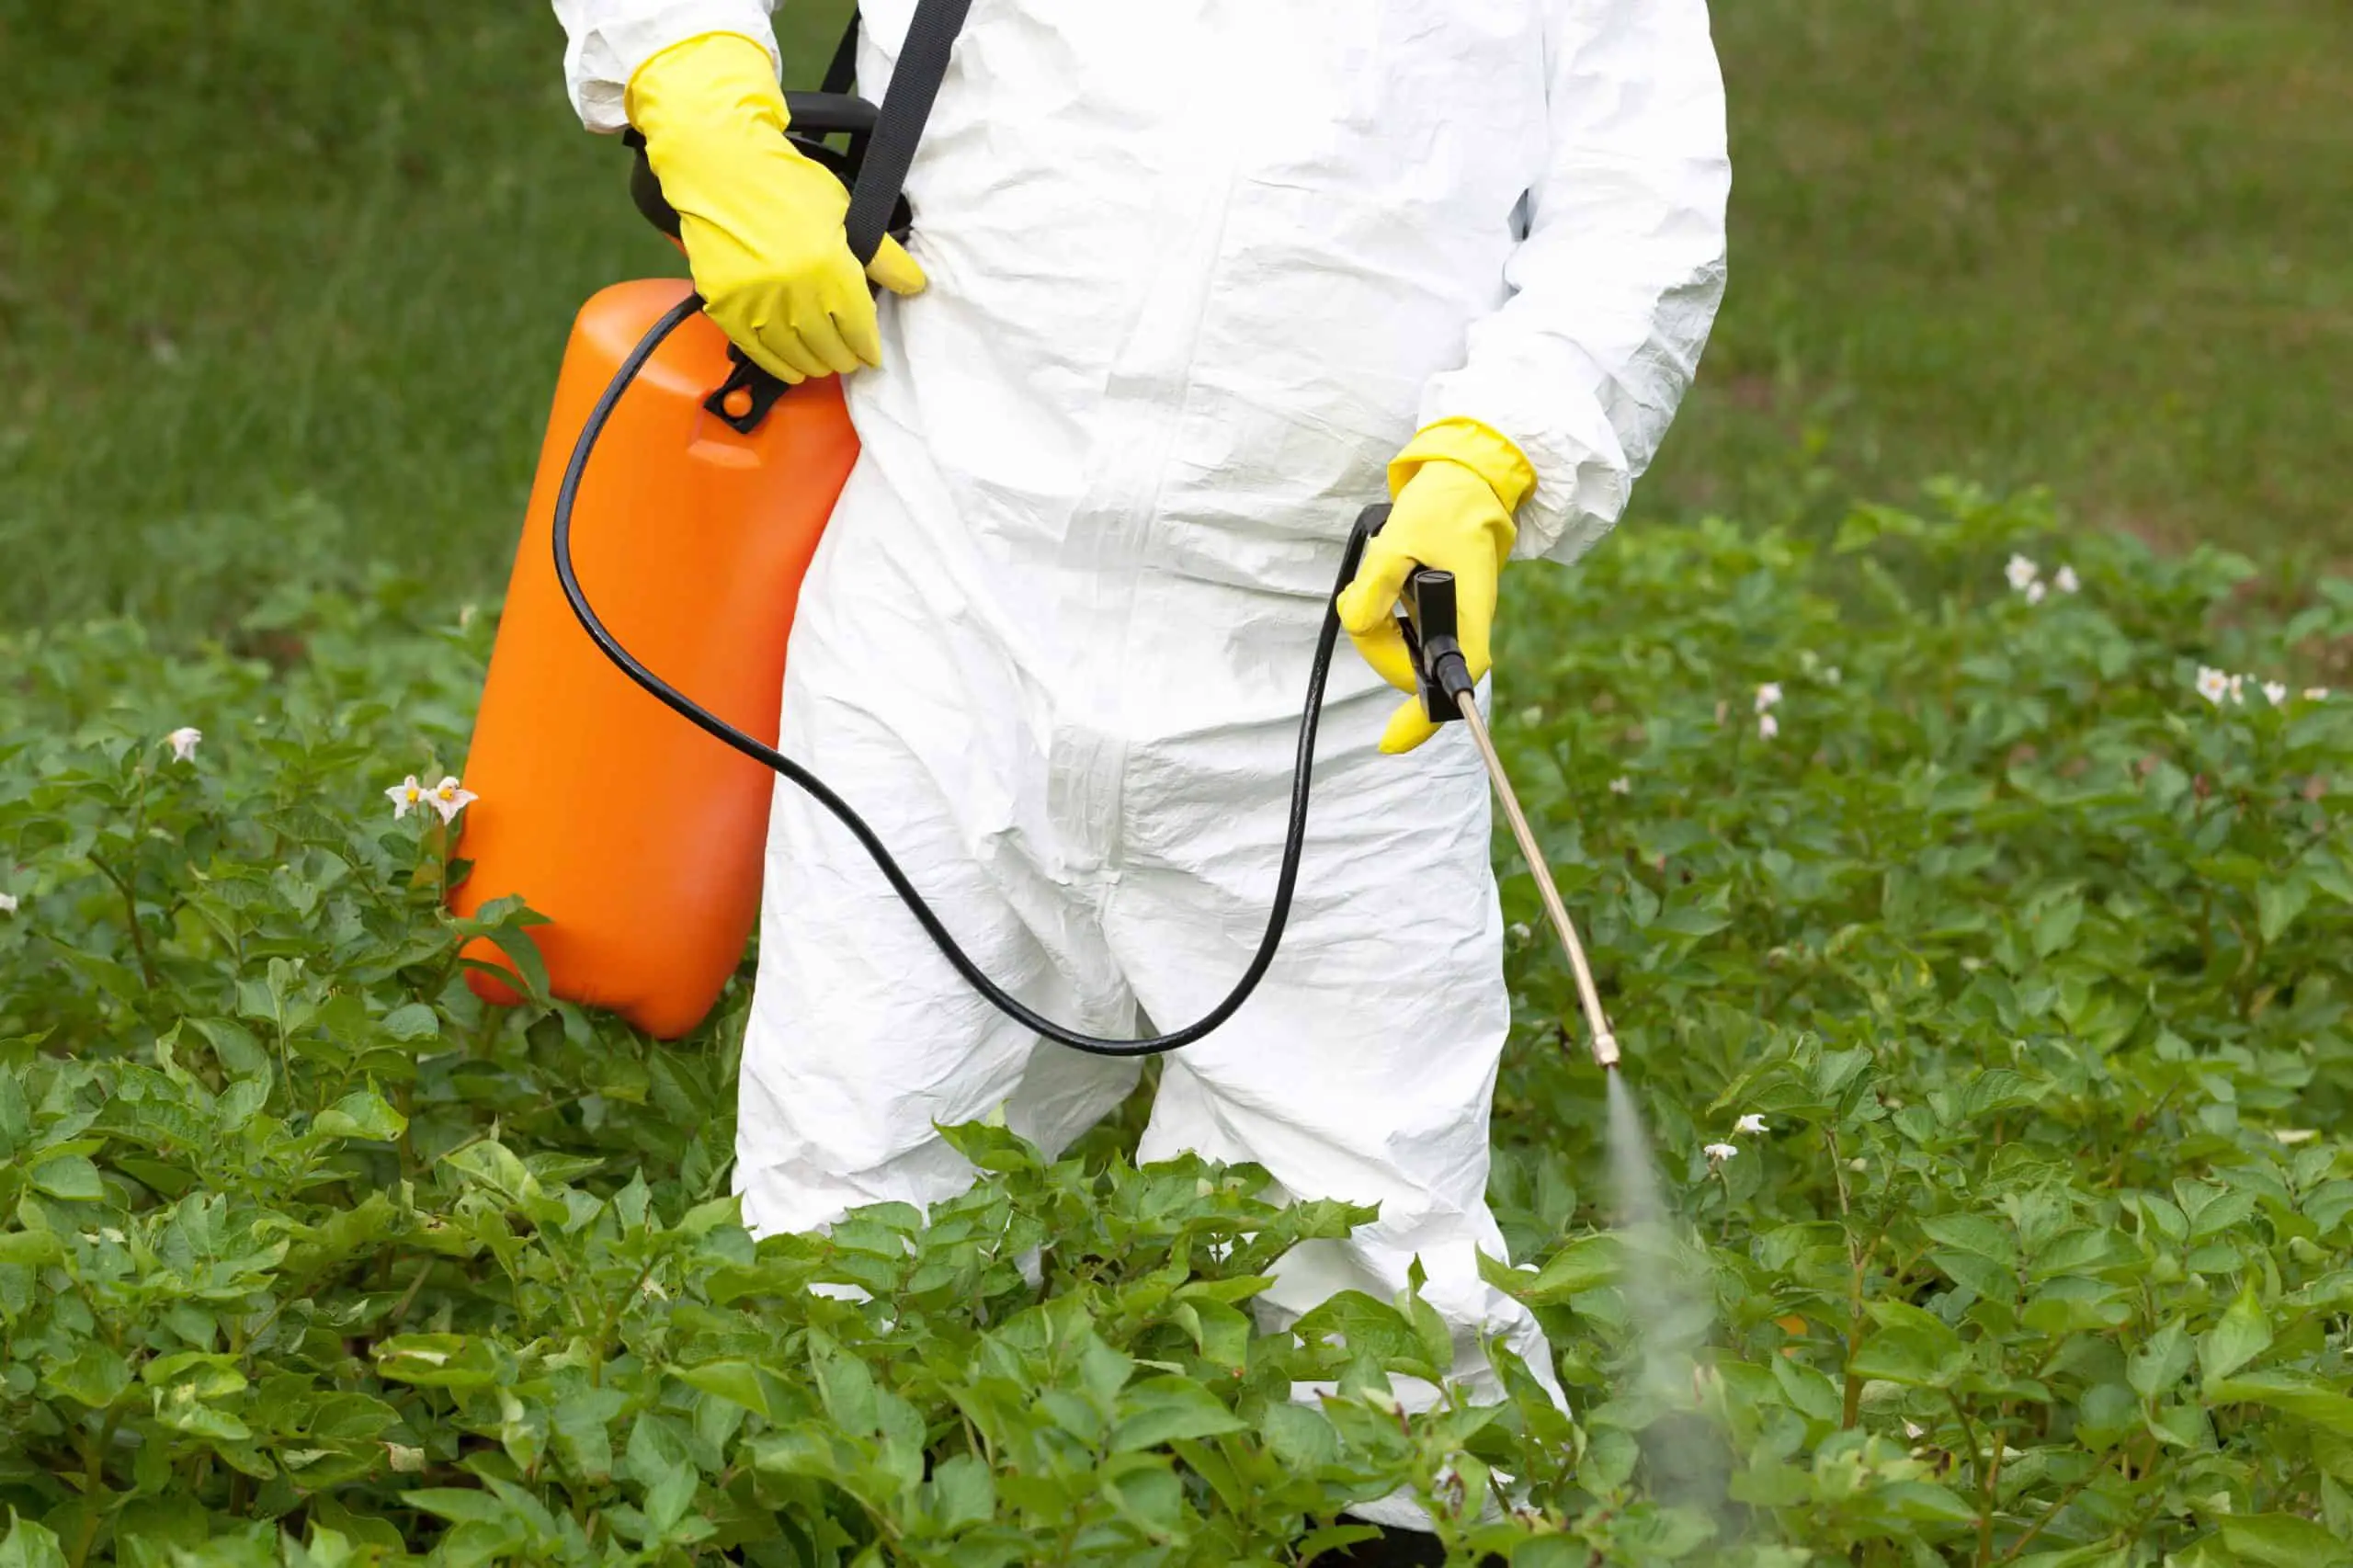 Kill Japanese knotweed treatment via spraying glysophate chemicals